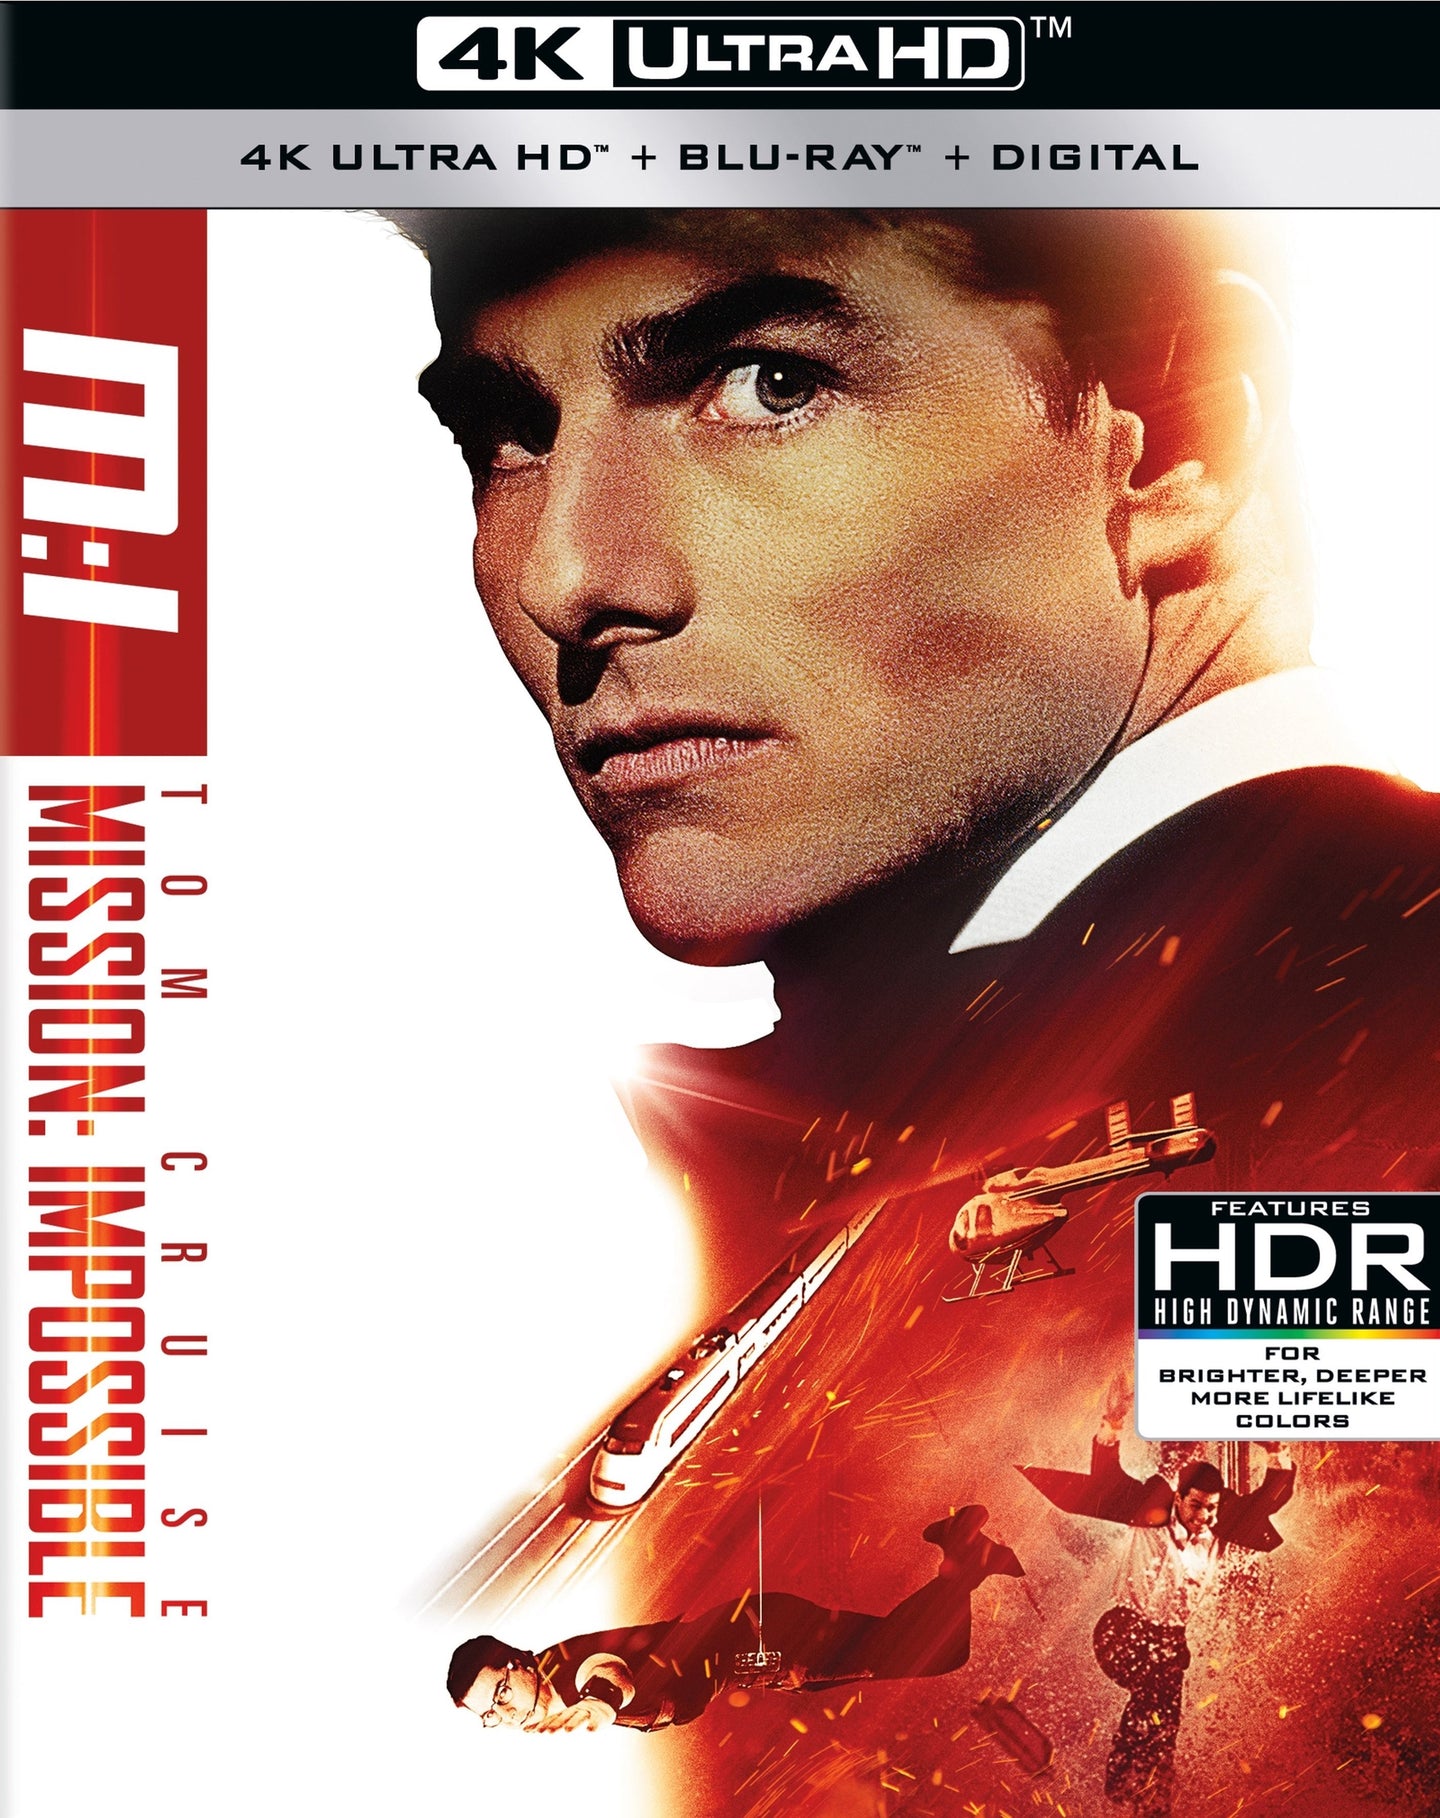 Mission Impossible (1996) iTunes 4K redemption only